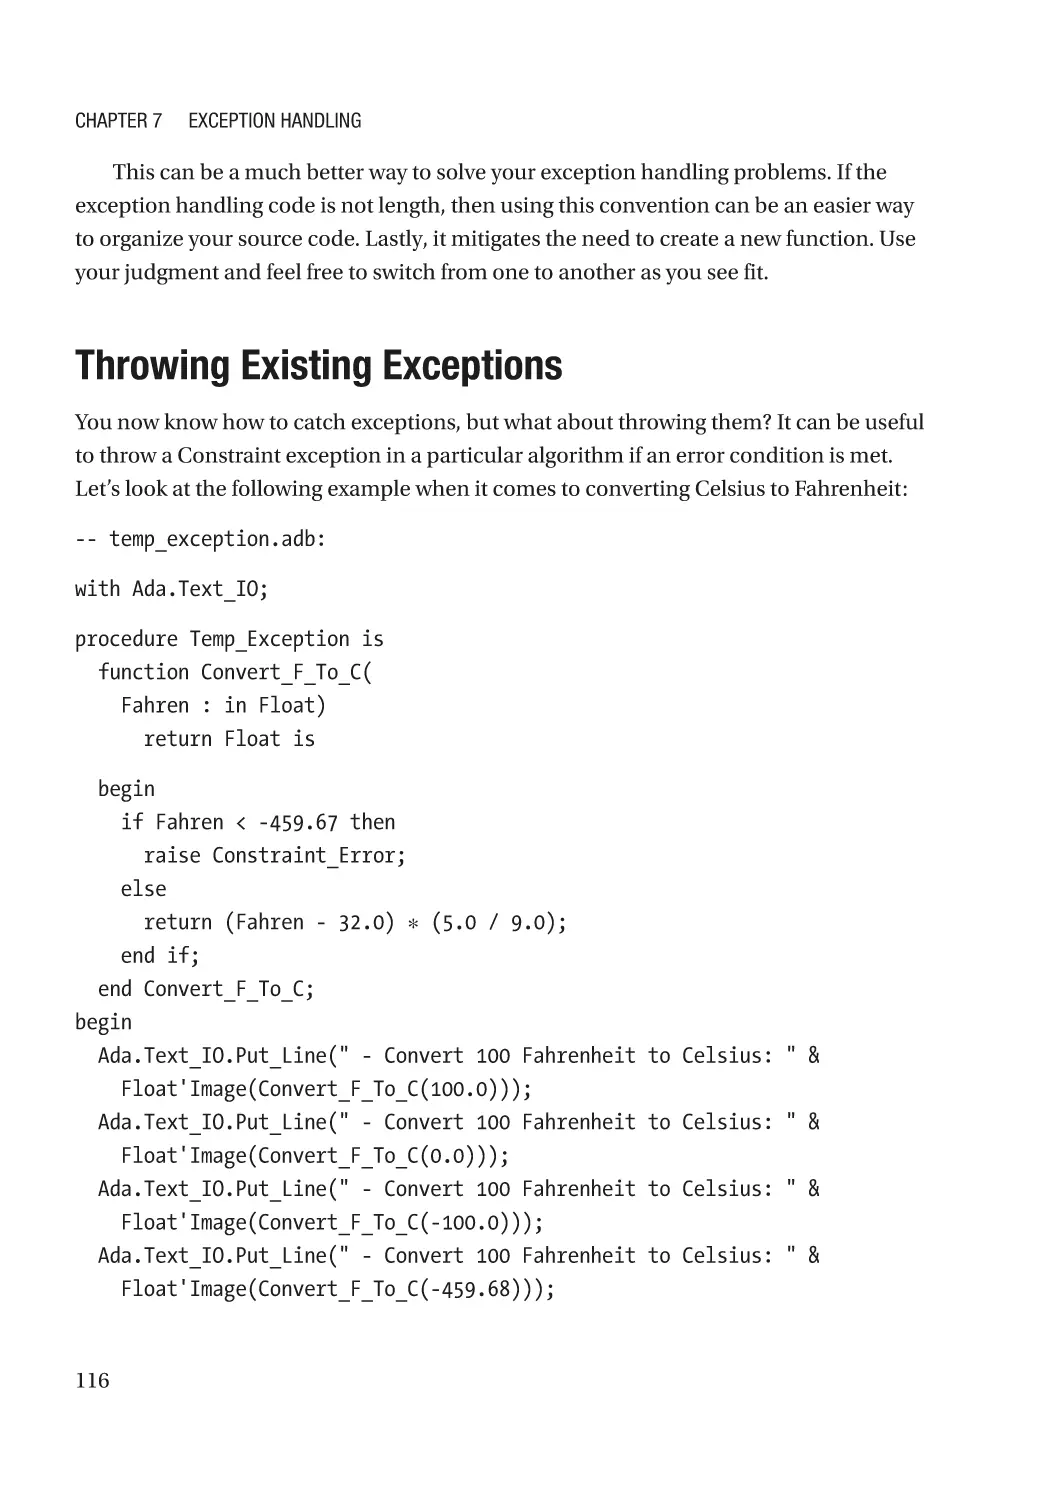 Throwing Existing Exceptions